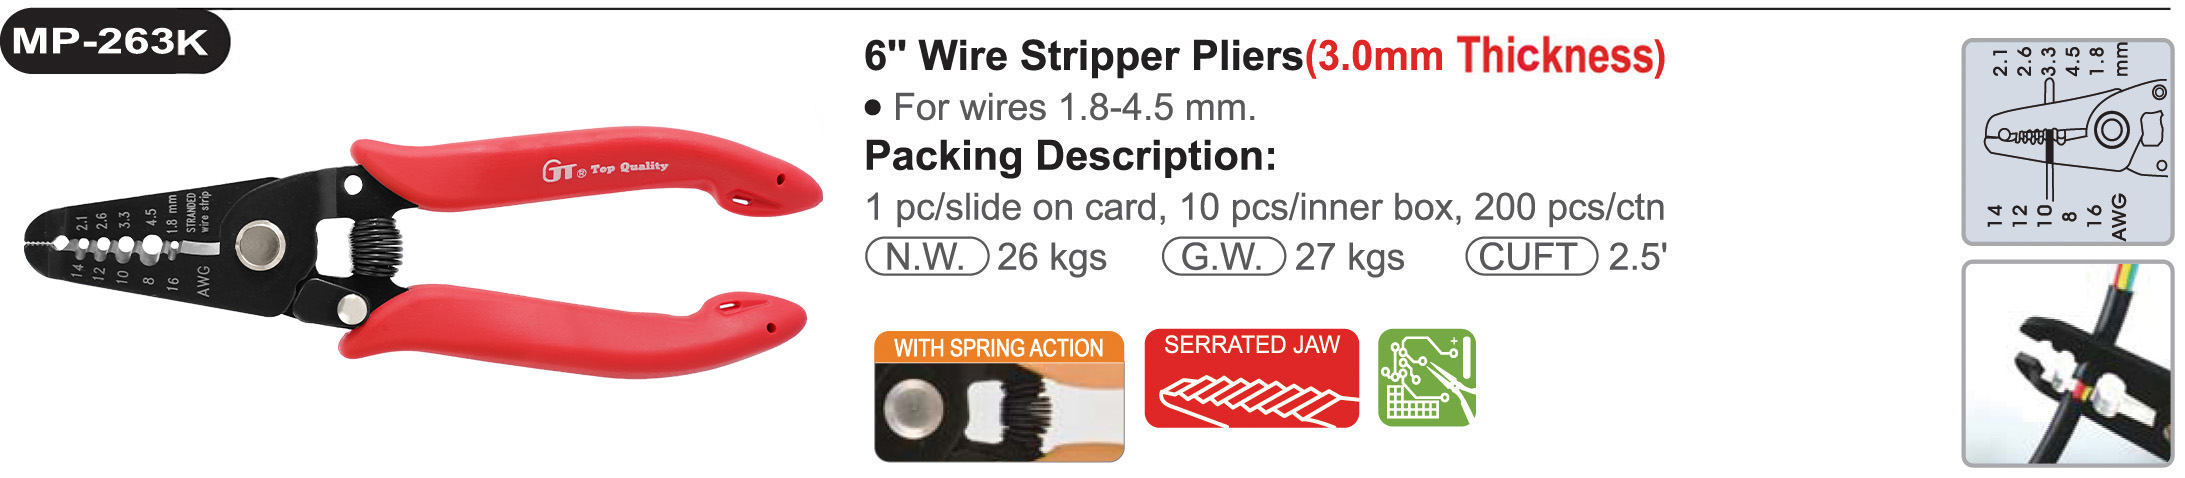 proimages/product/pliers/wire_strippers/Wire_Stripper/MP-263K/MP-263K.jpg